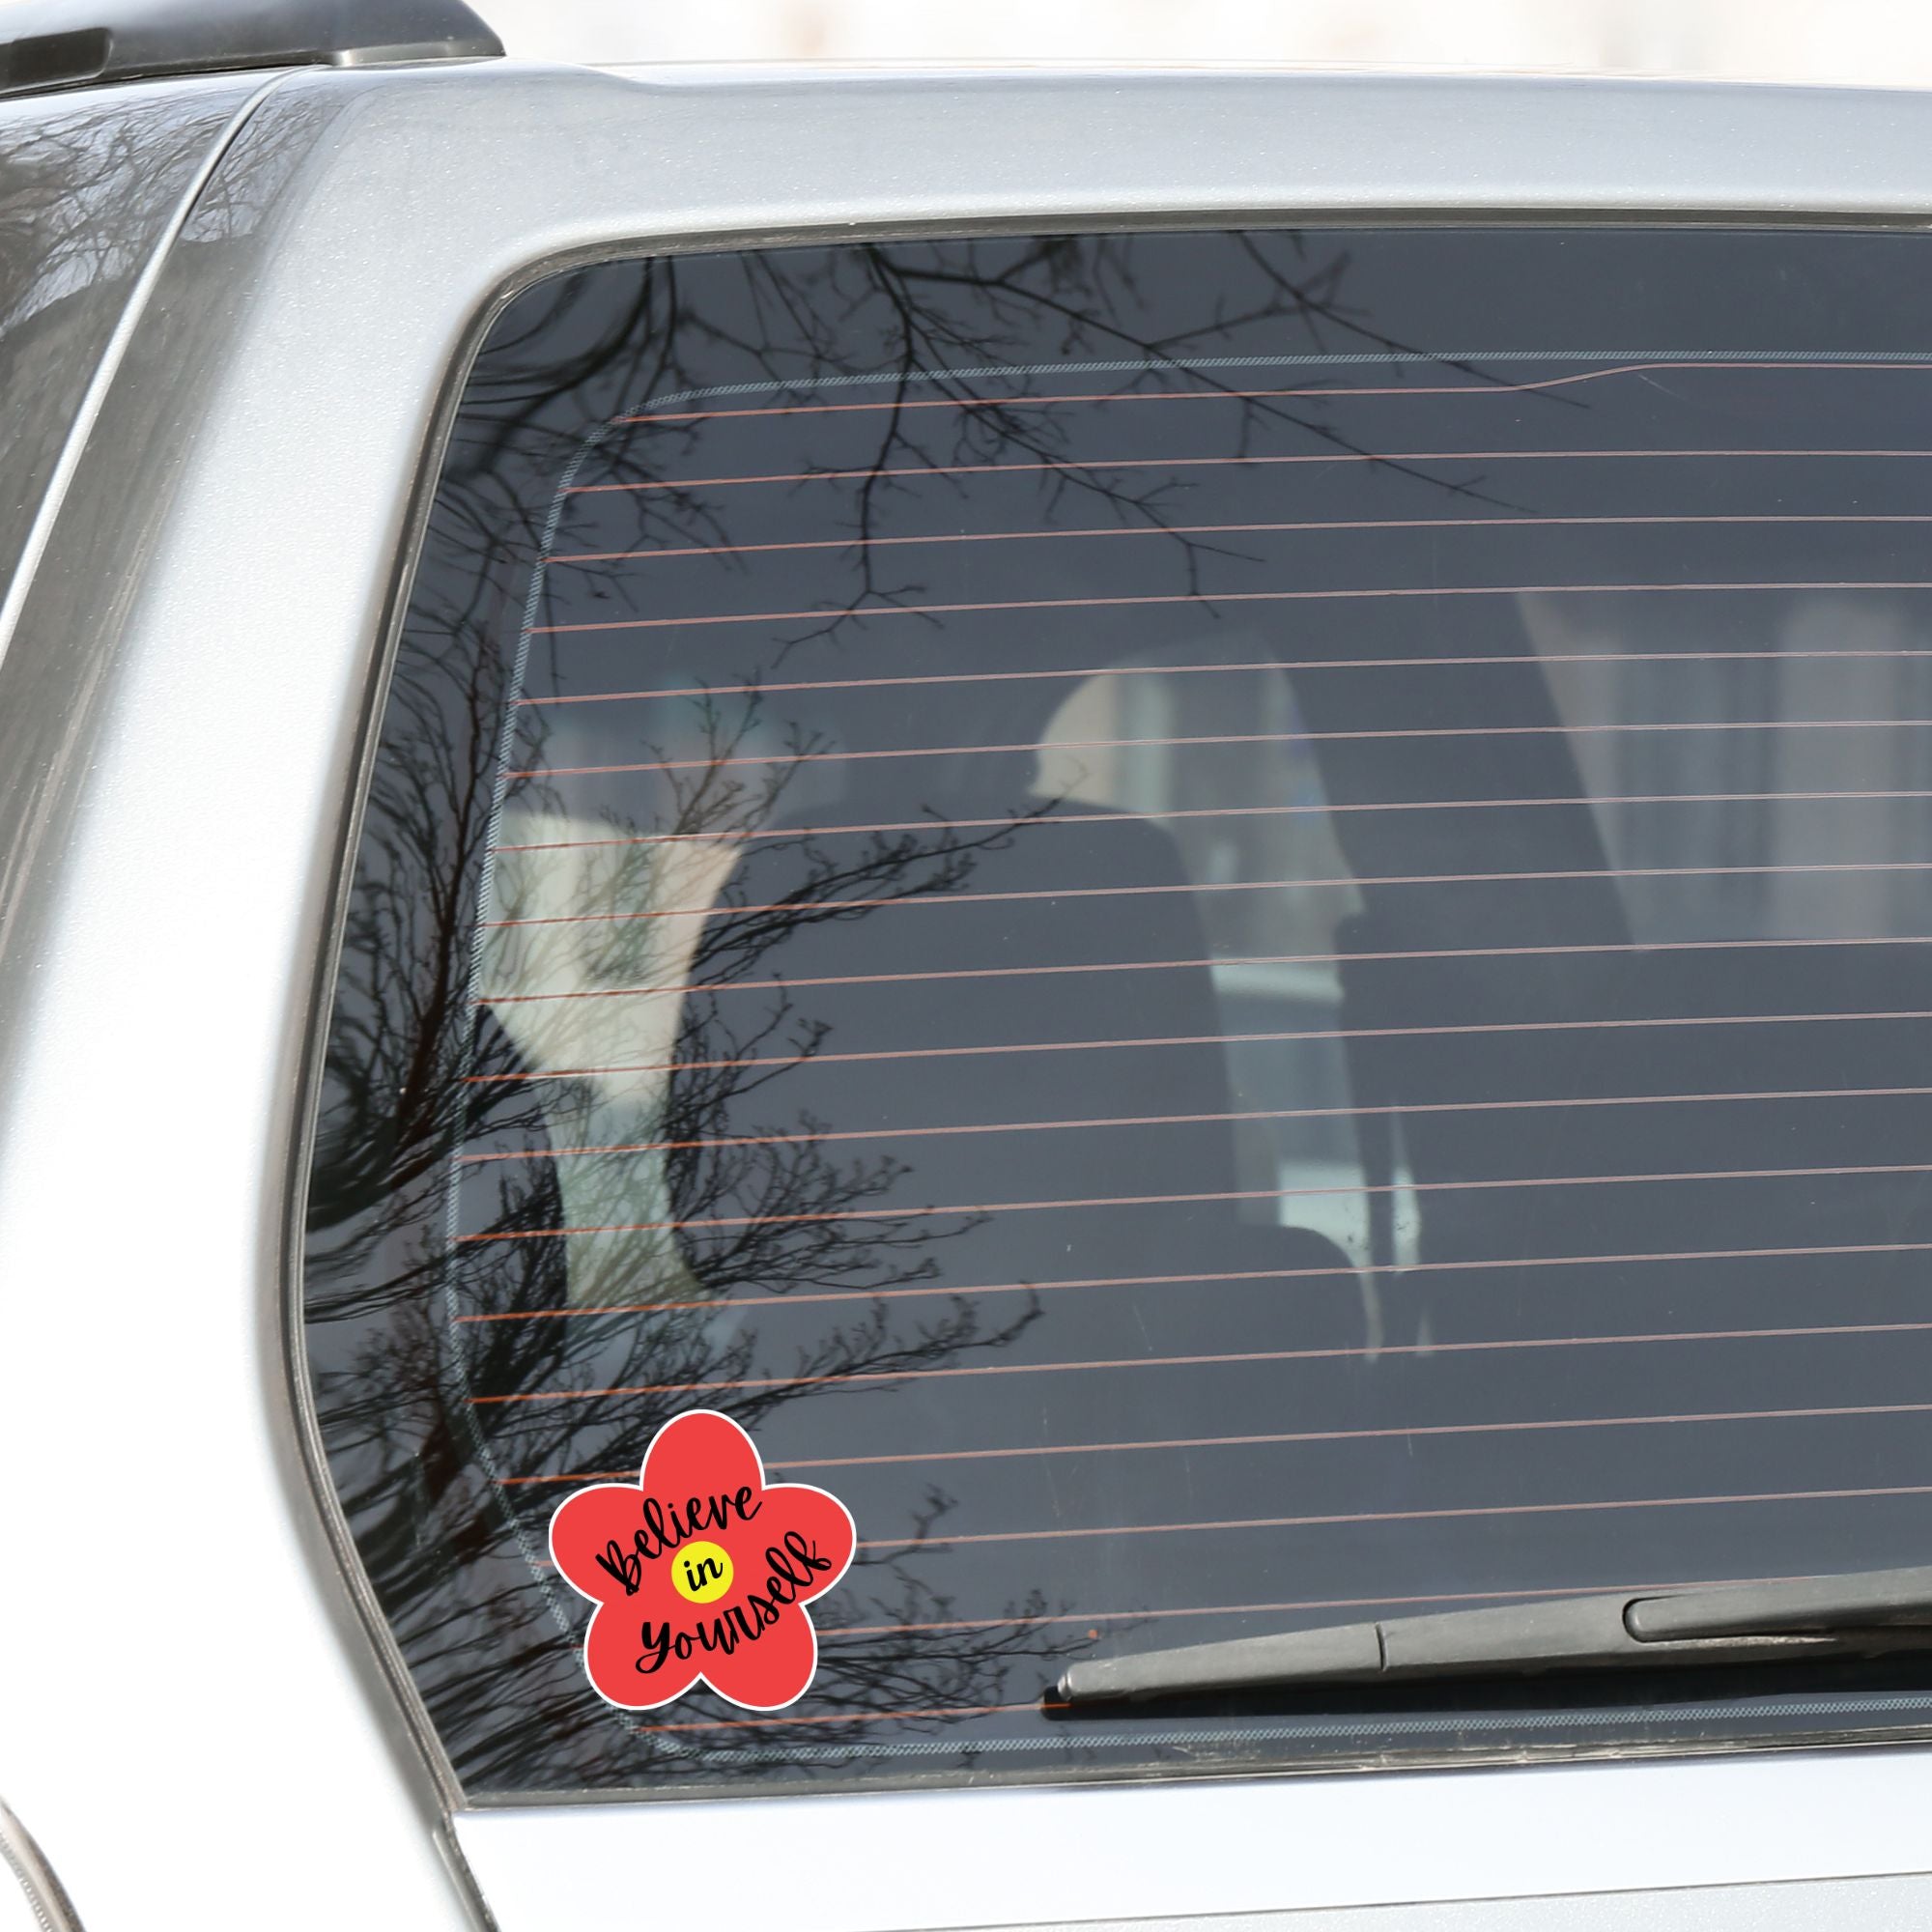 This inspirational individual die-cut sticker features a red flower with a yellow center, with the words Believe in Yourself written across it. Check out our Inspirational collection for more inspiring stickers! This image shows the Believe in Yourself sticker on the back window of a car.